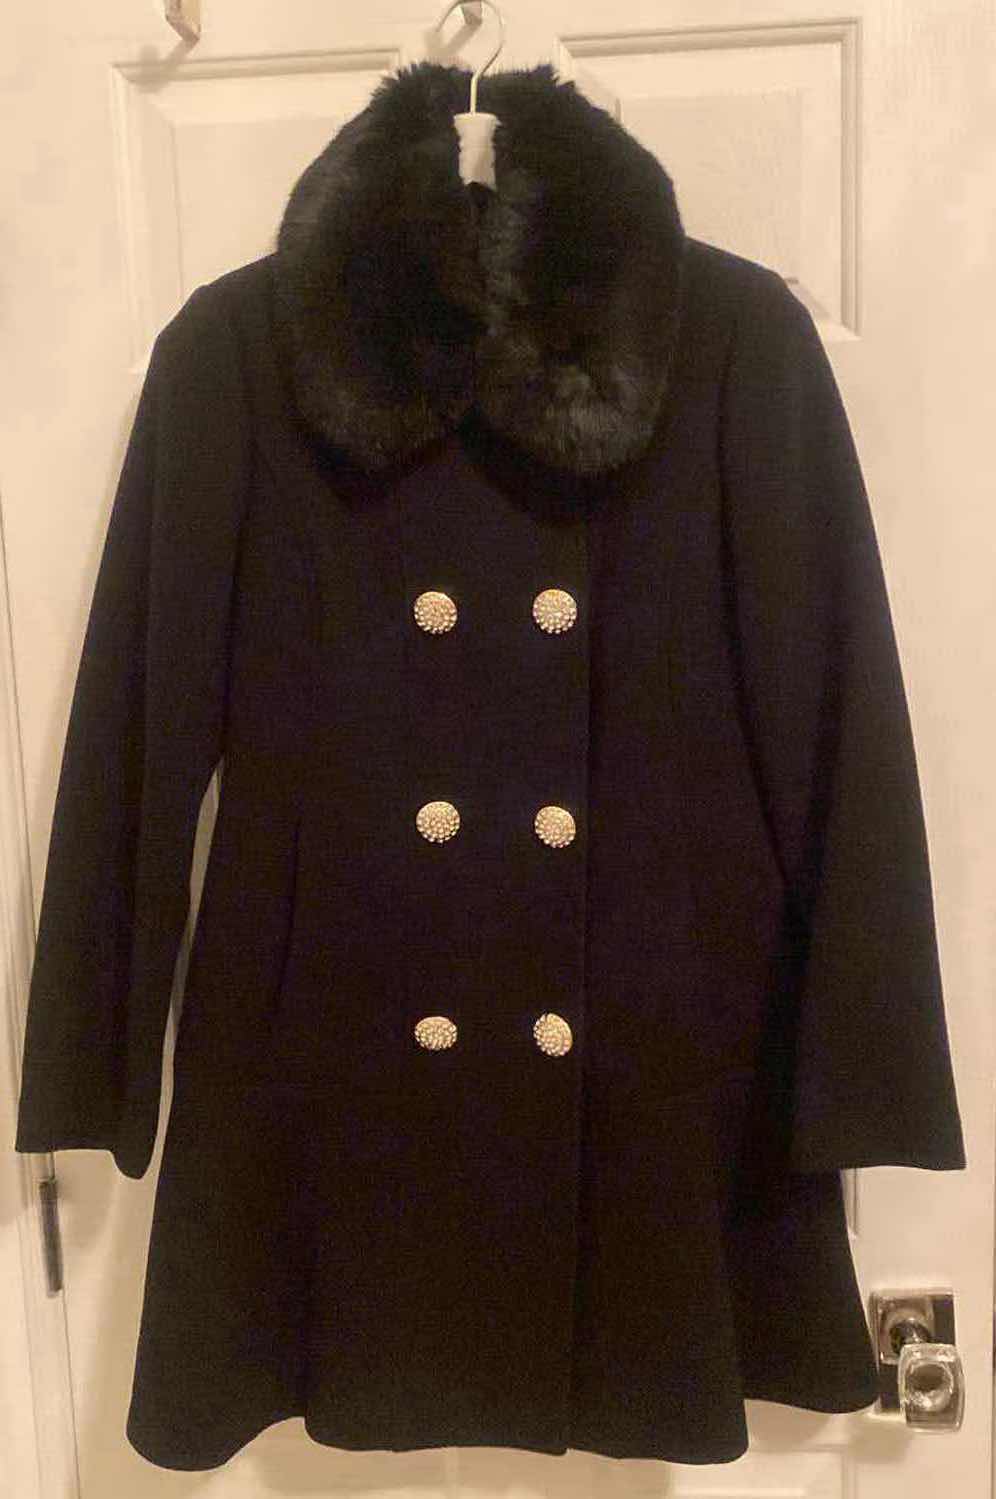 Photo 1 of GENTLY LOVED LADIES SIZE LARGE KATE SPADE NEW YORK DOUBLE BREASTED JEWELED BUTTON COAT WITH REMOVABLE FAUX FUR COLLAR